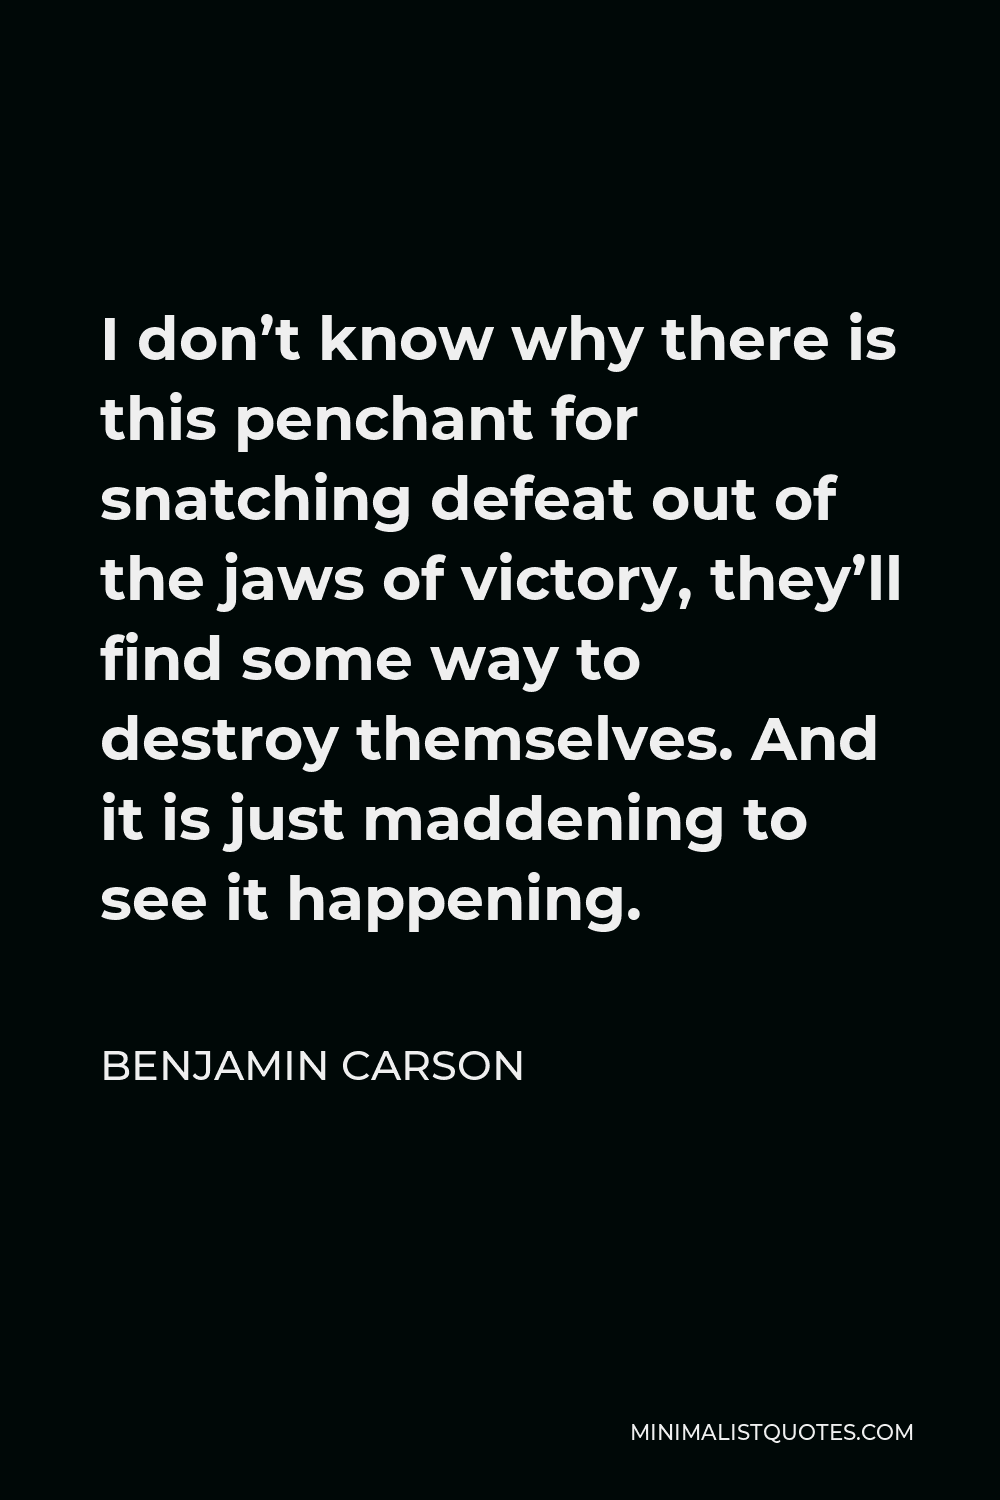 Benjamin Carson Quote - I don’t know why there is this penchant for snatching defeat out of the jaws of victory, they’ll find some way to destroy themselves. And it is just maddening to see it happening.